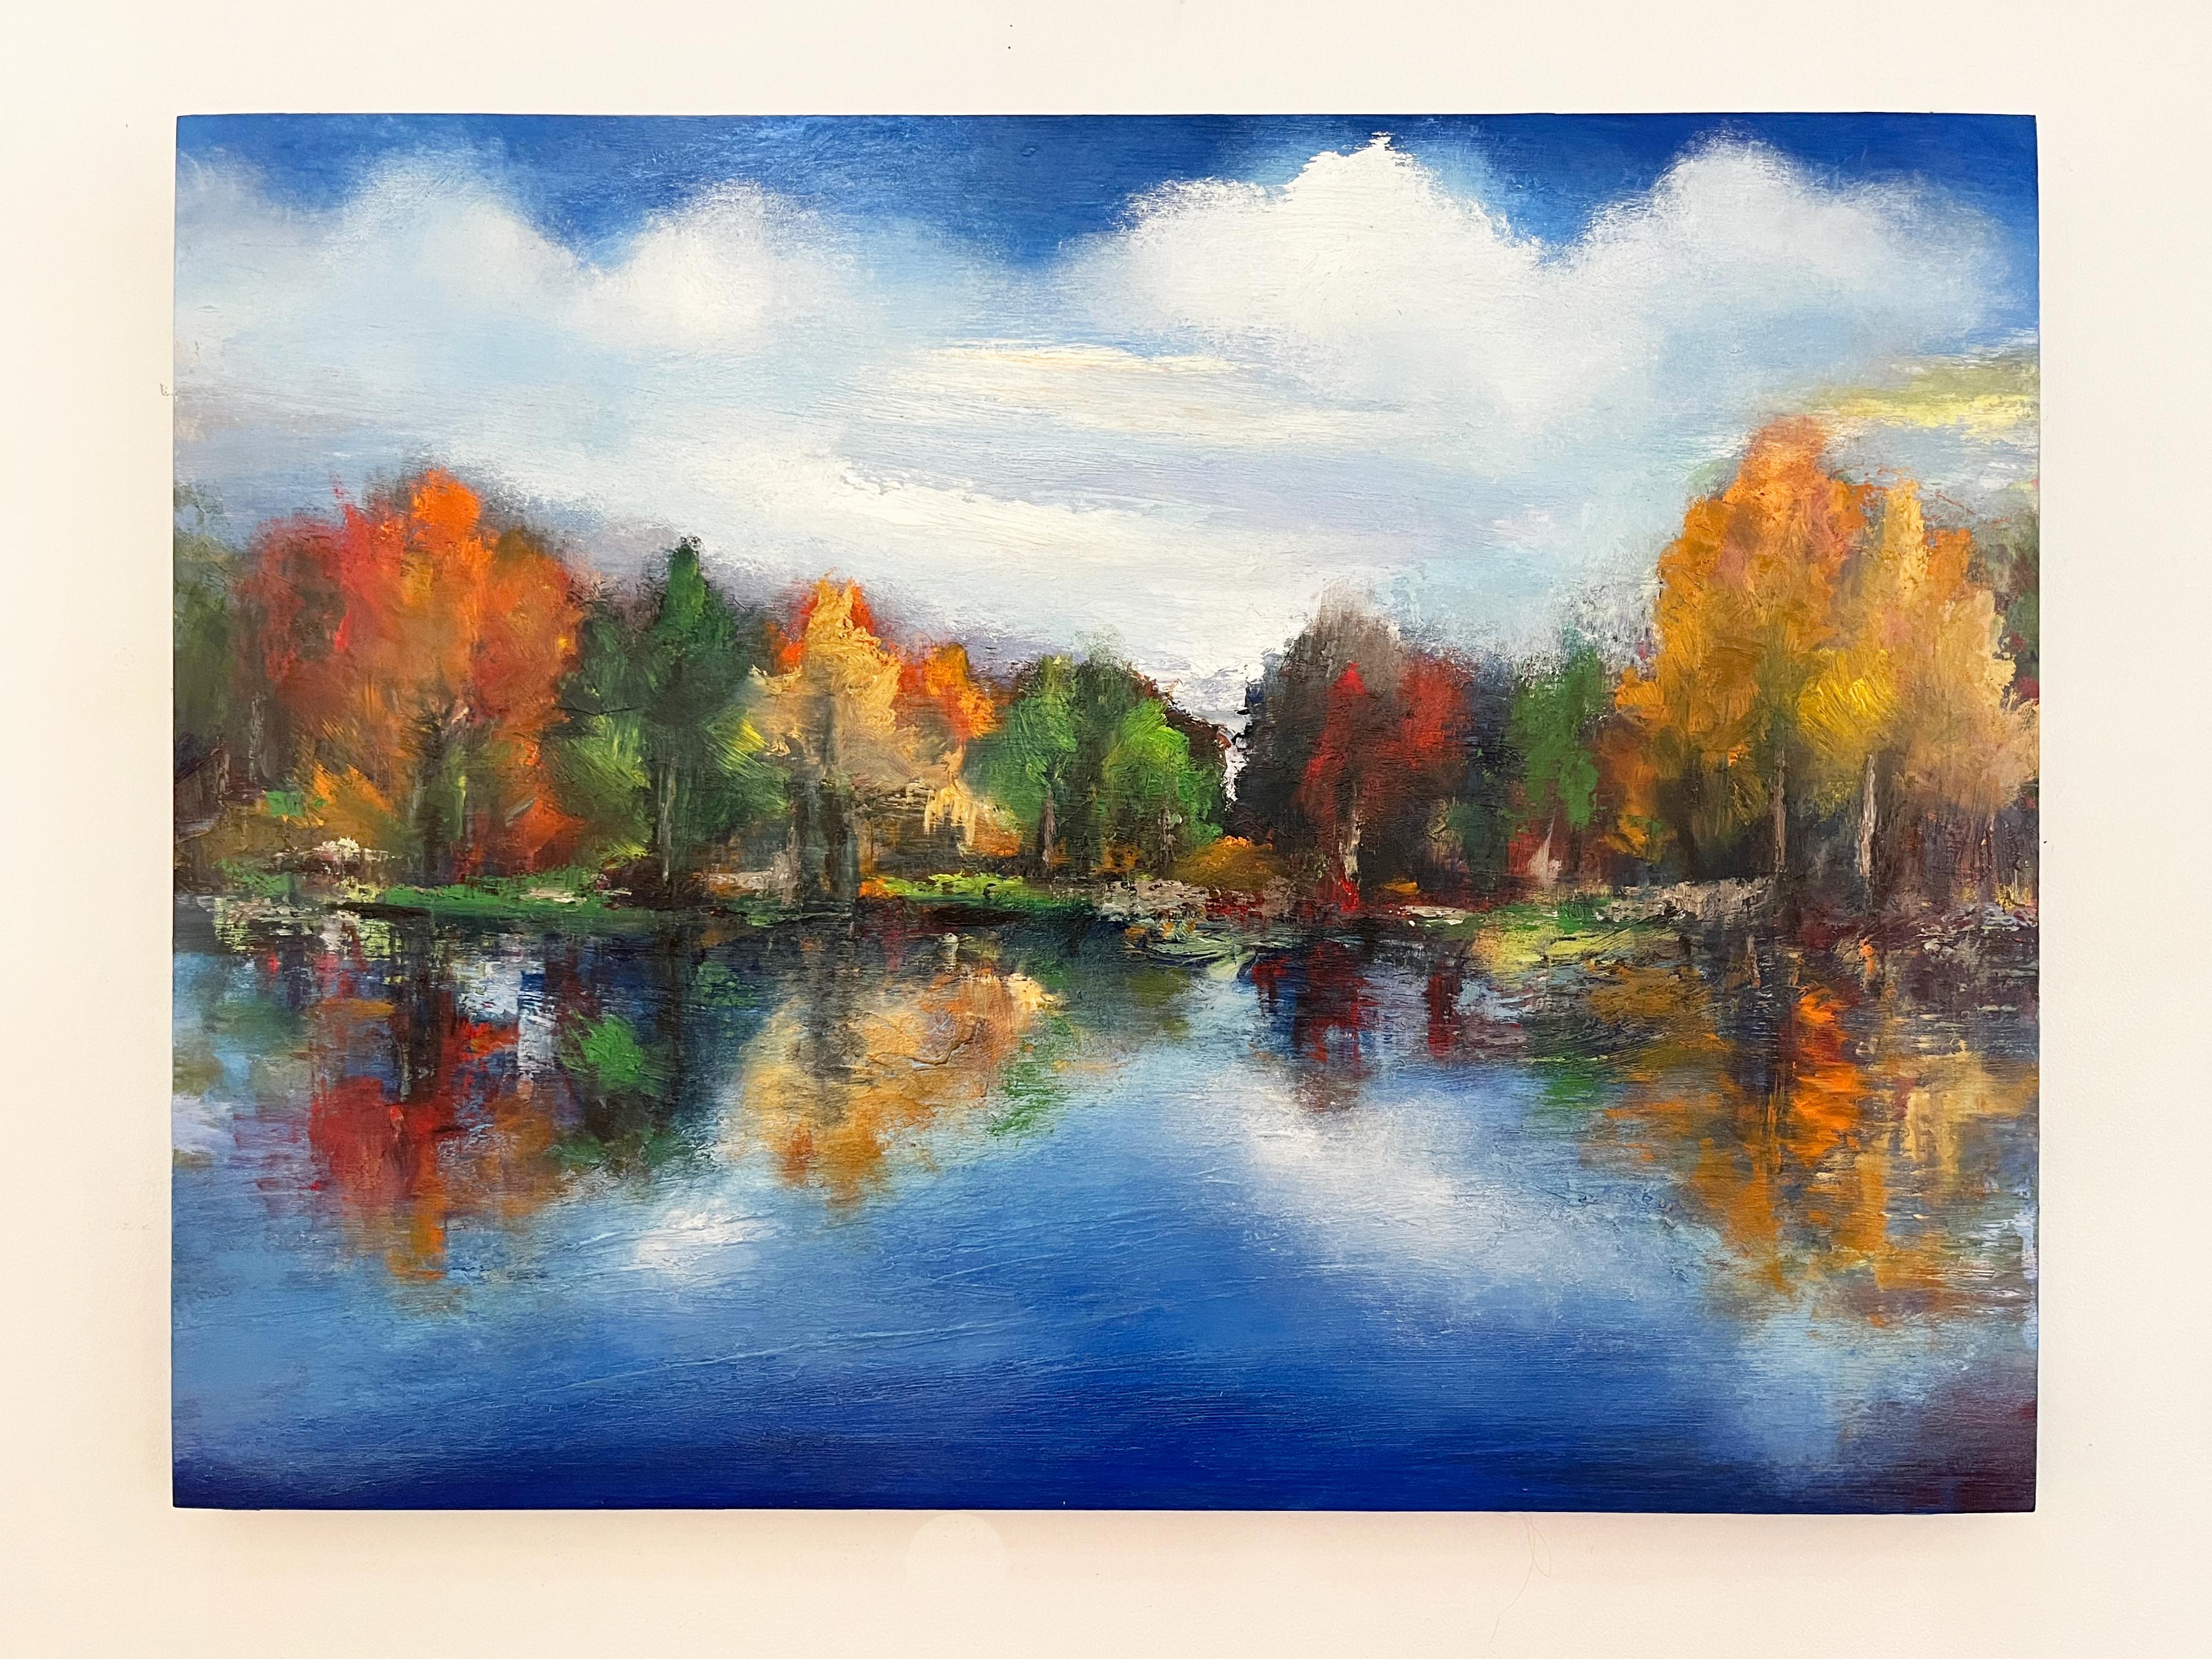 Paul chester Landscape Painting - Last September, 30x40", serene oil landscape in blues and orange w/ fall foliage